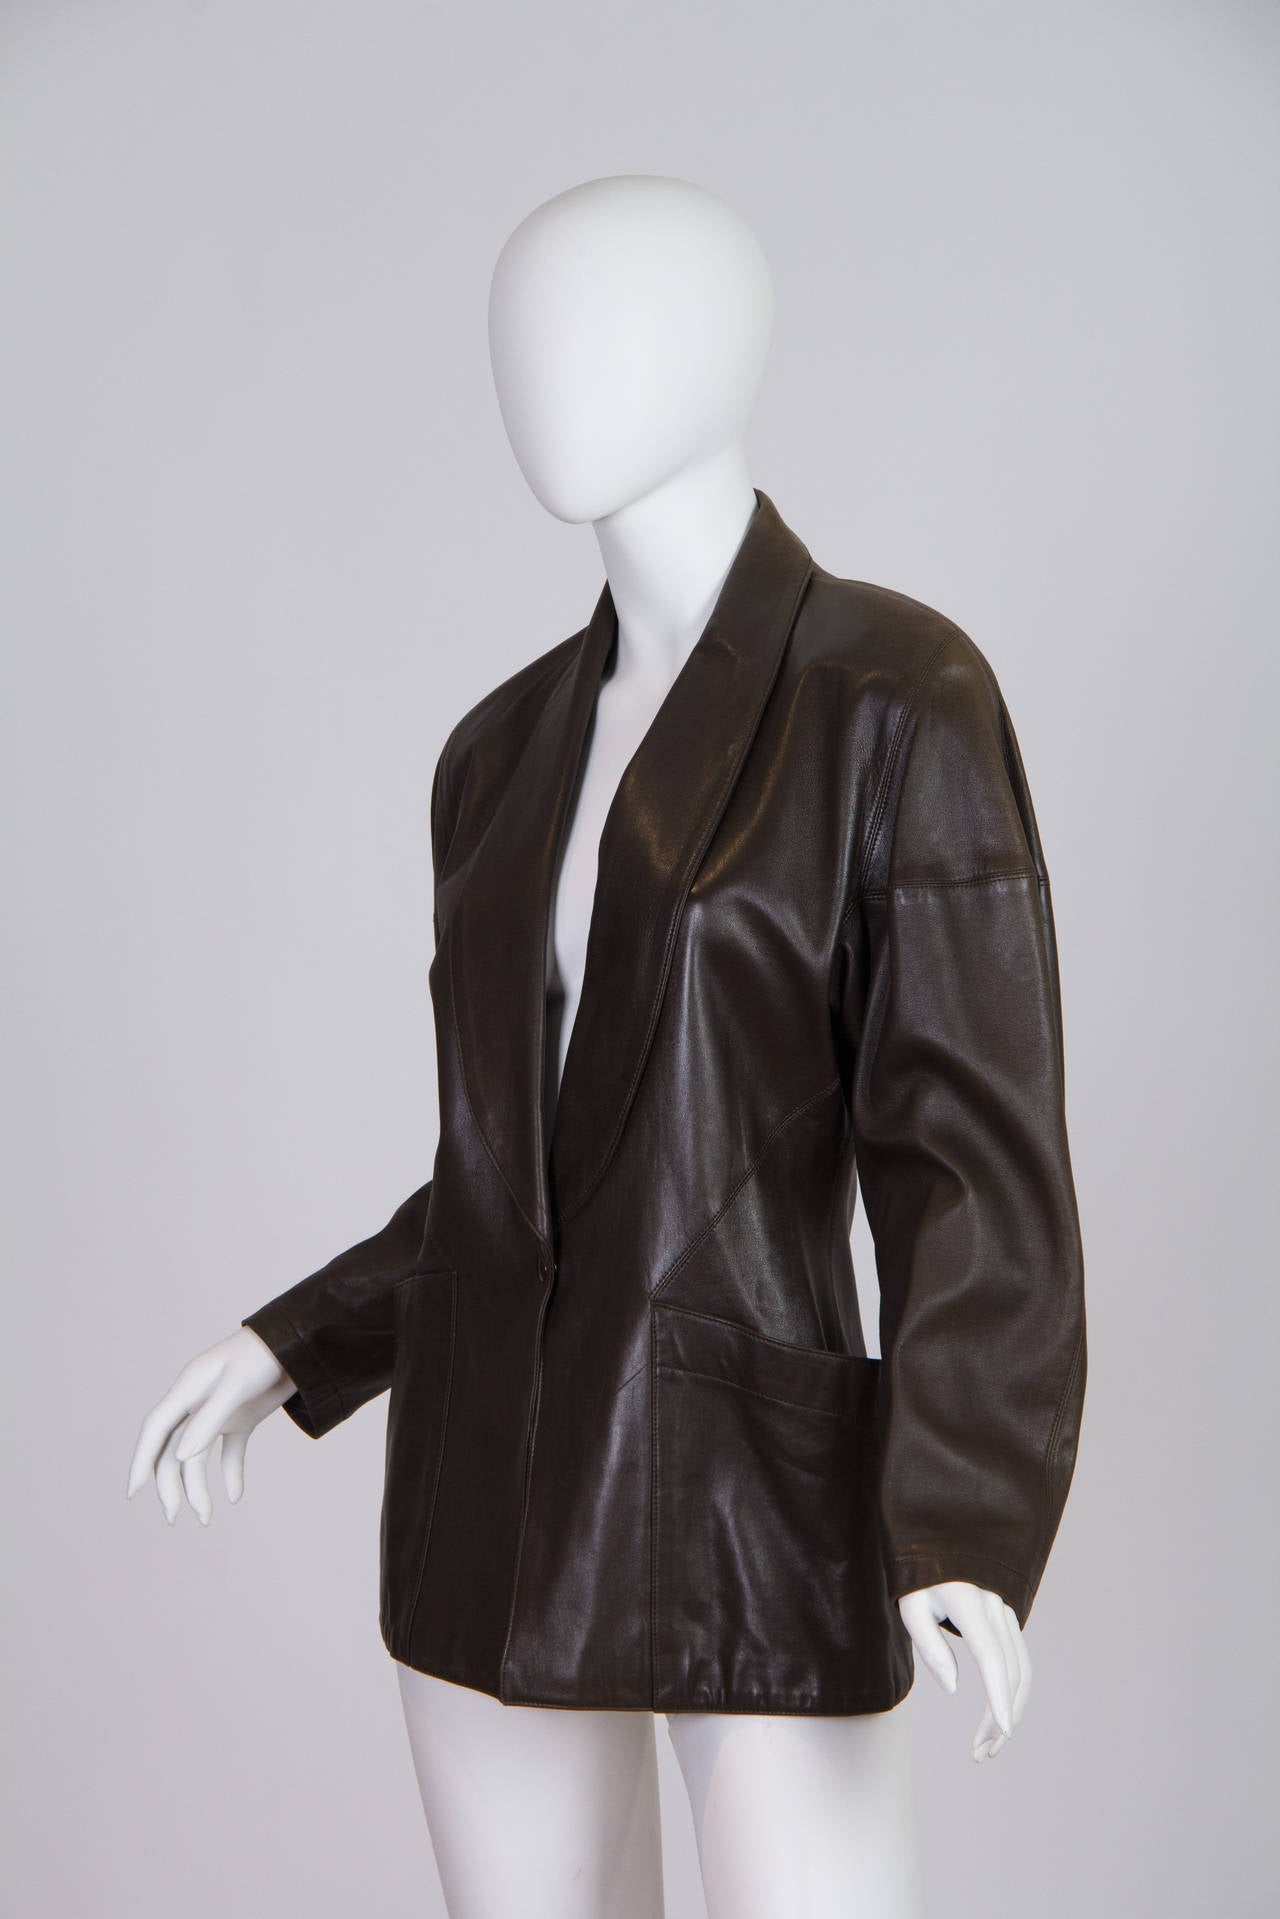 This is a great harder to find larger size jacket from Alaia. It's loose on our mannequin and is meant to fit snug in the waist. Great butter soft leather and large hip pockets make this jacket a dream to wear.